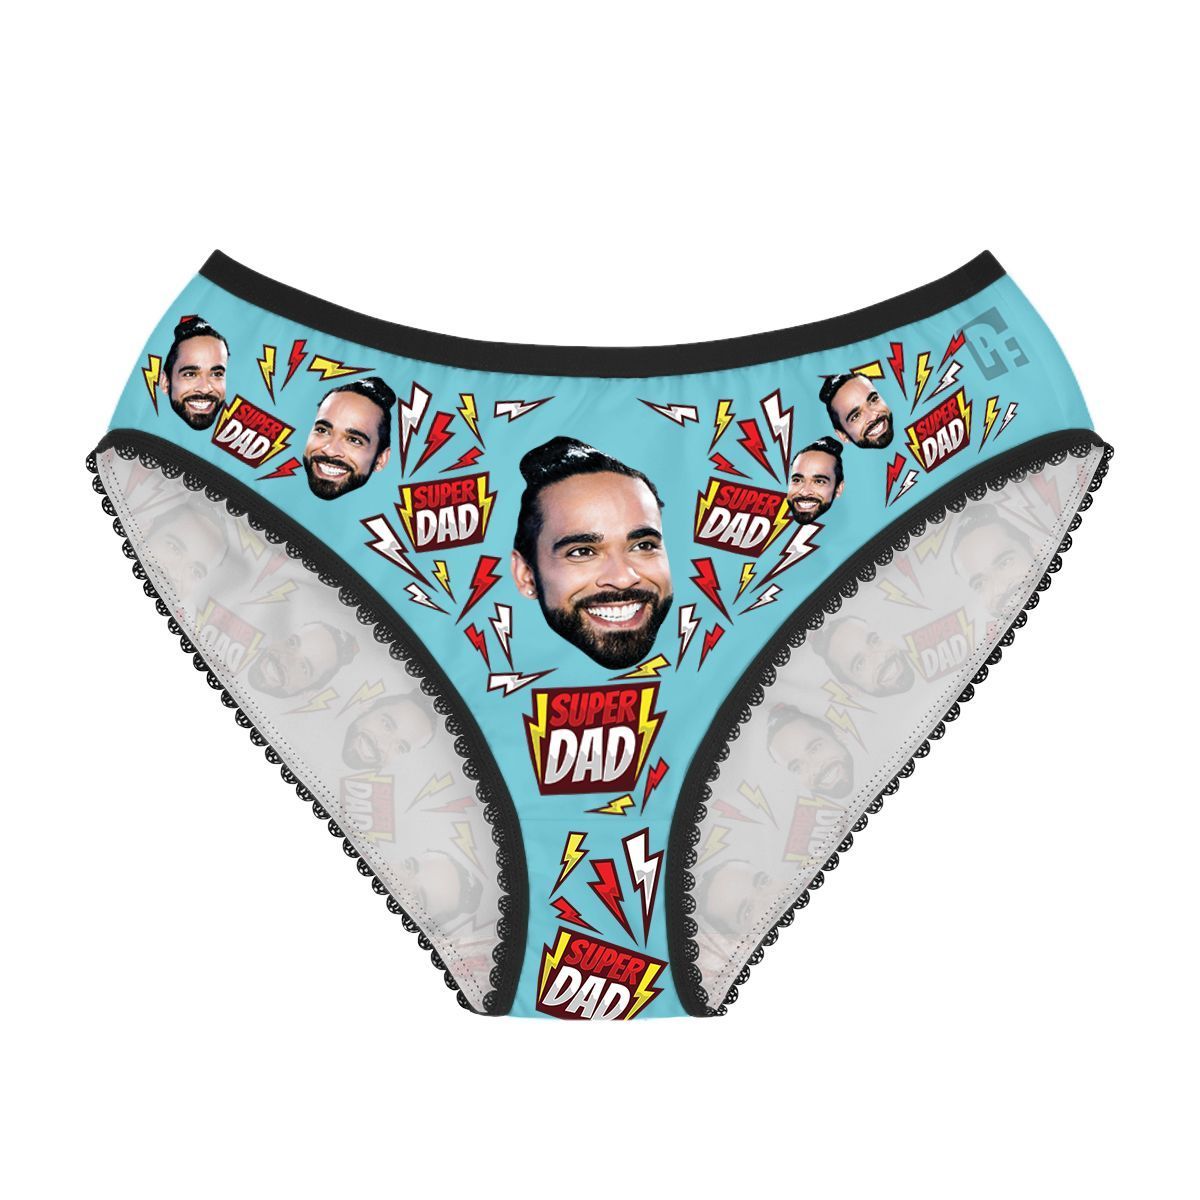 Blue Super dad women's underwear briefs personalized with photo printed on them